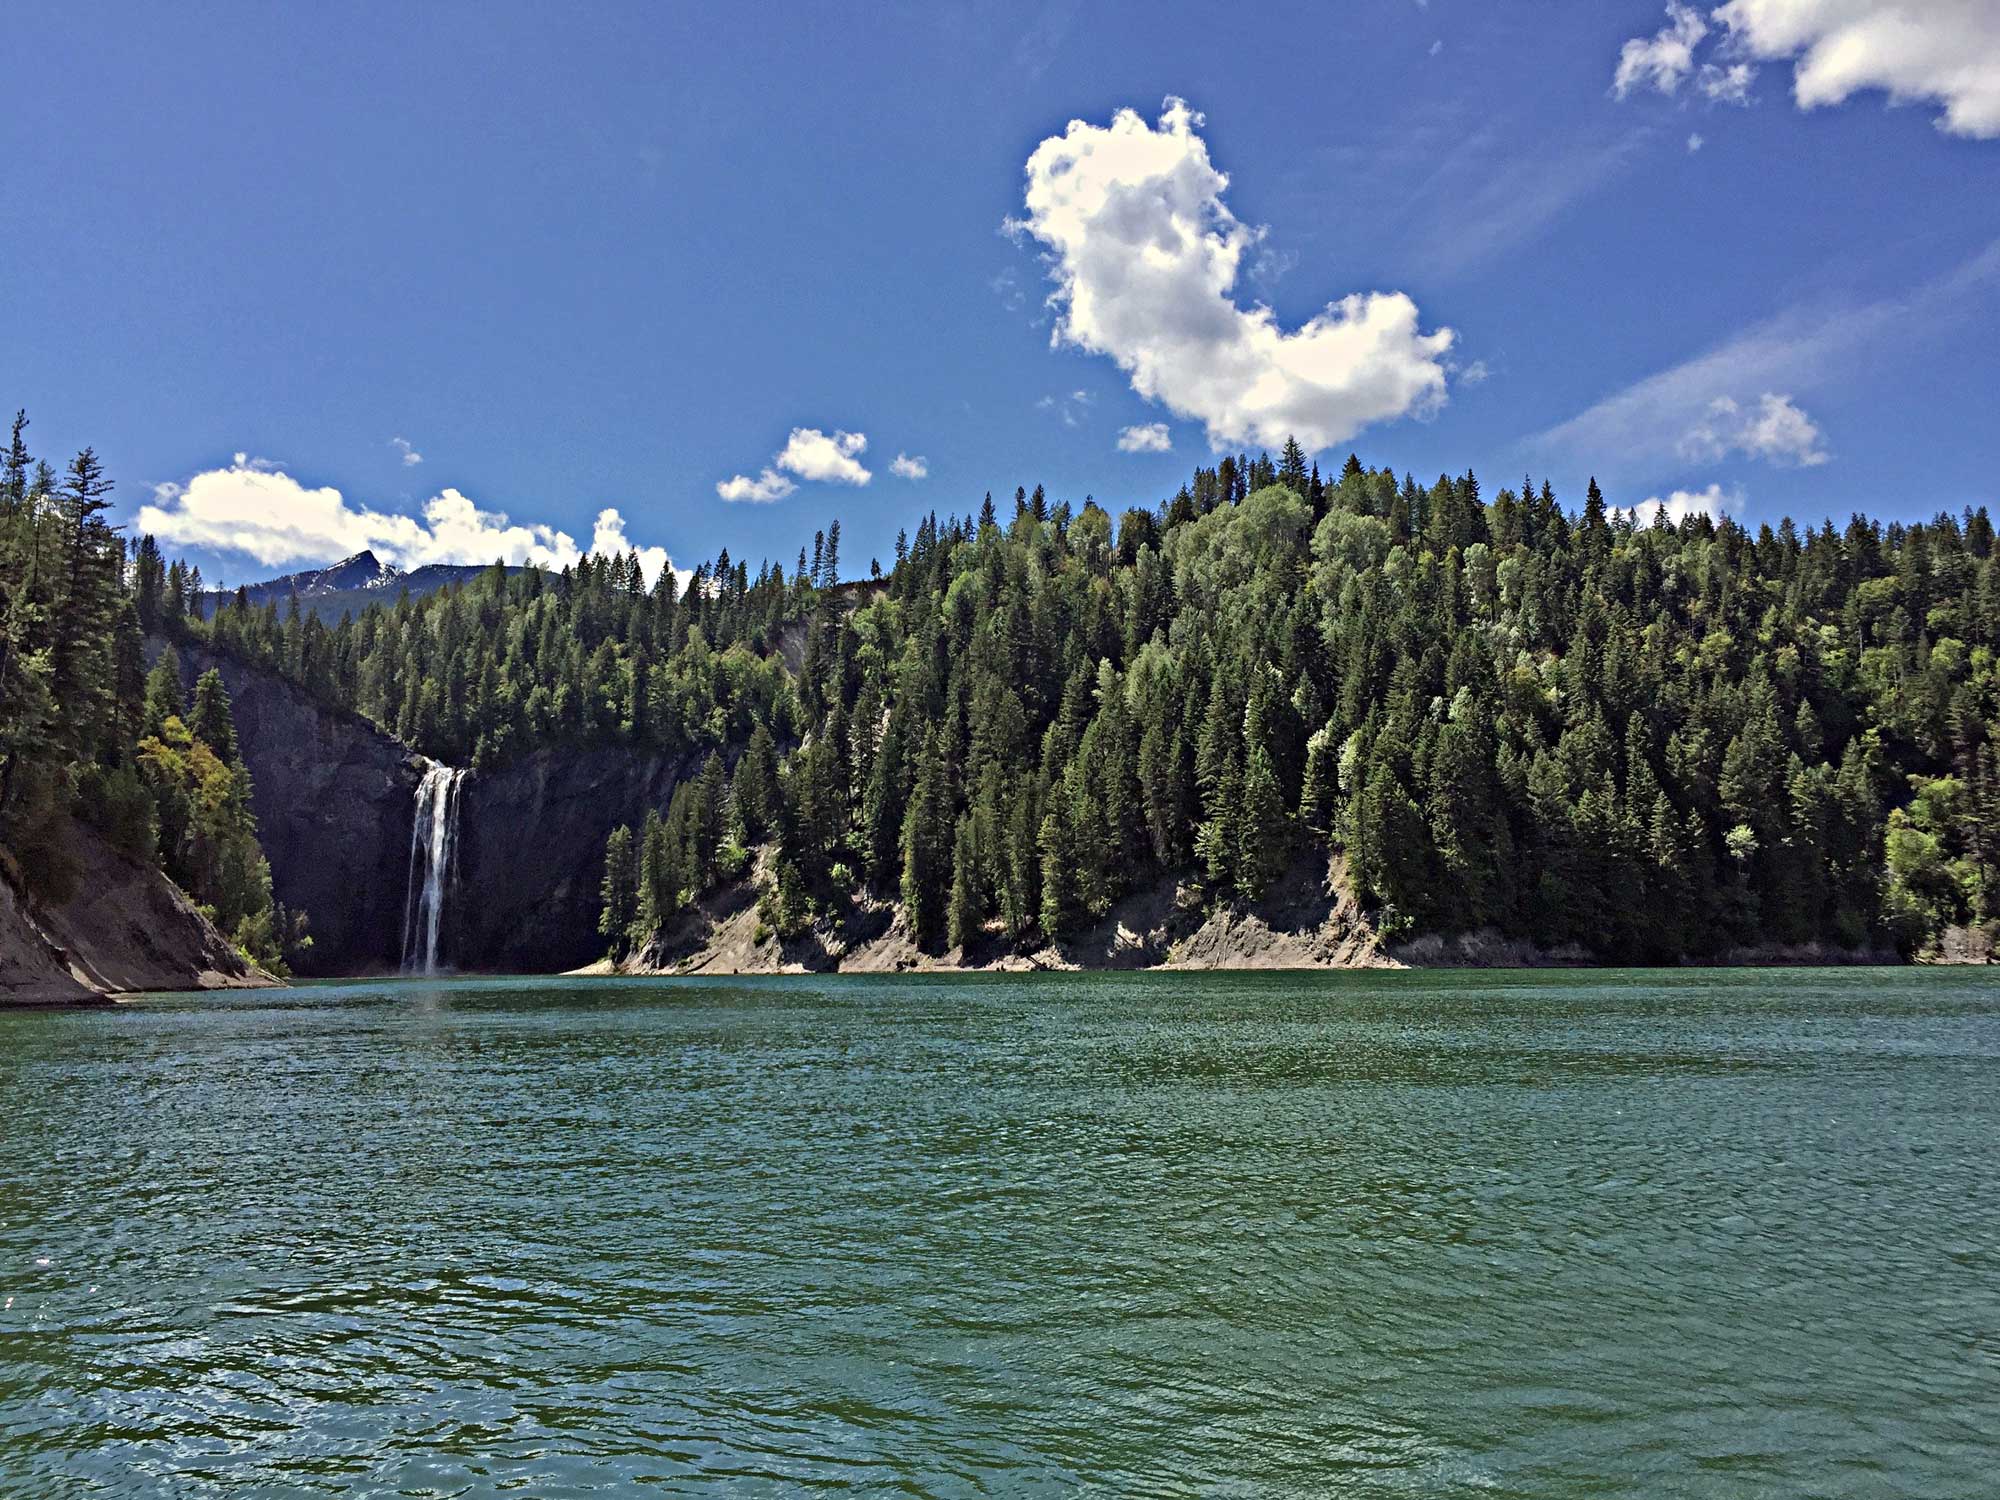 Photograph of PeeWee Falls on Boundary Reservoir, northeastern Washington. The photo shows the surface of a lake in the foreground with conifer-covered hills rising in the background. A waterfall is flowering over a cliff at the far end of the lake.